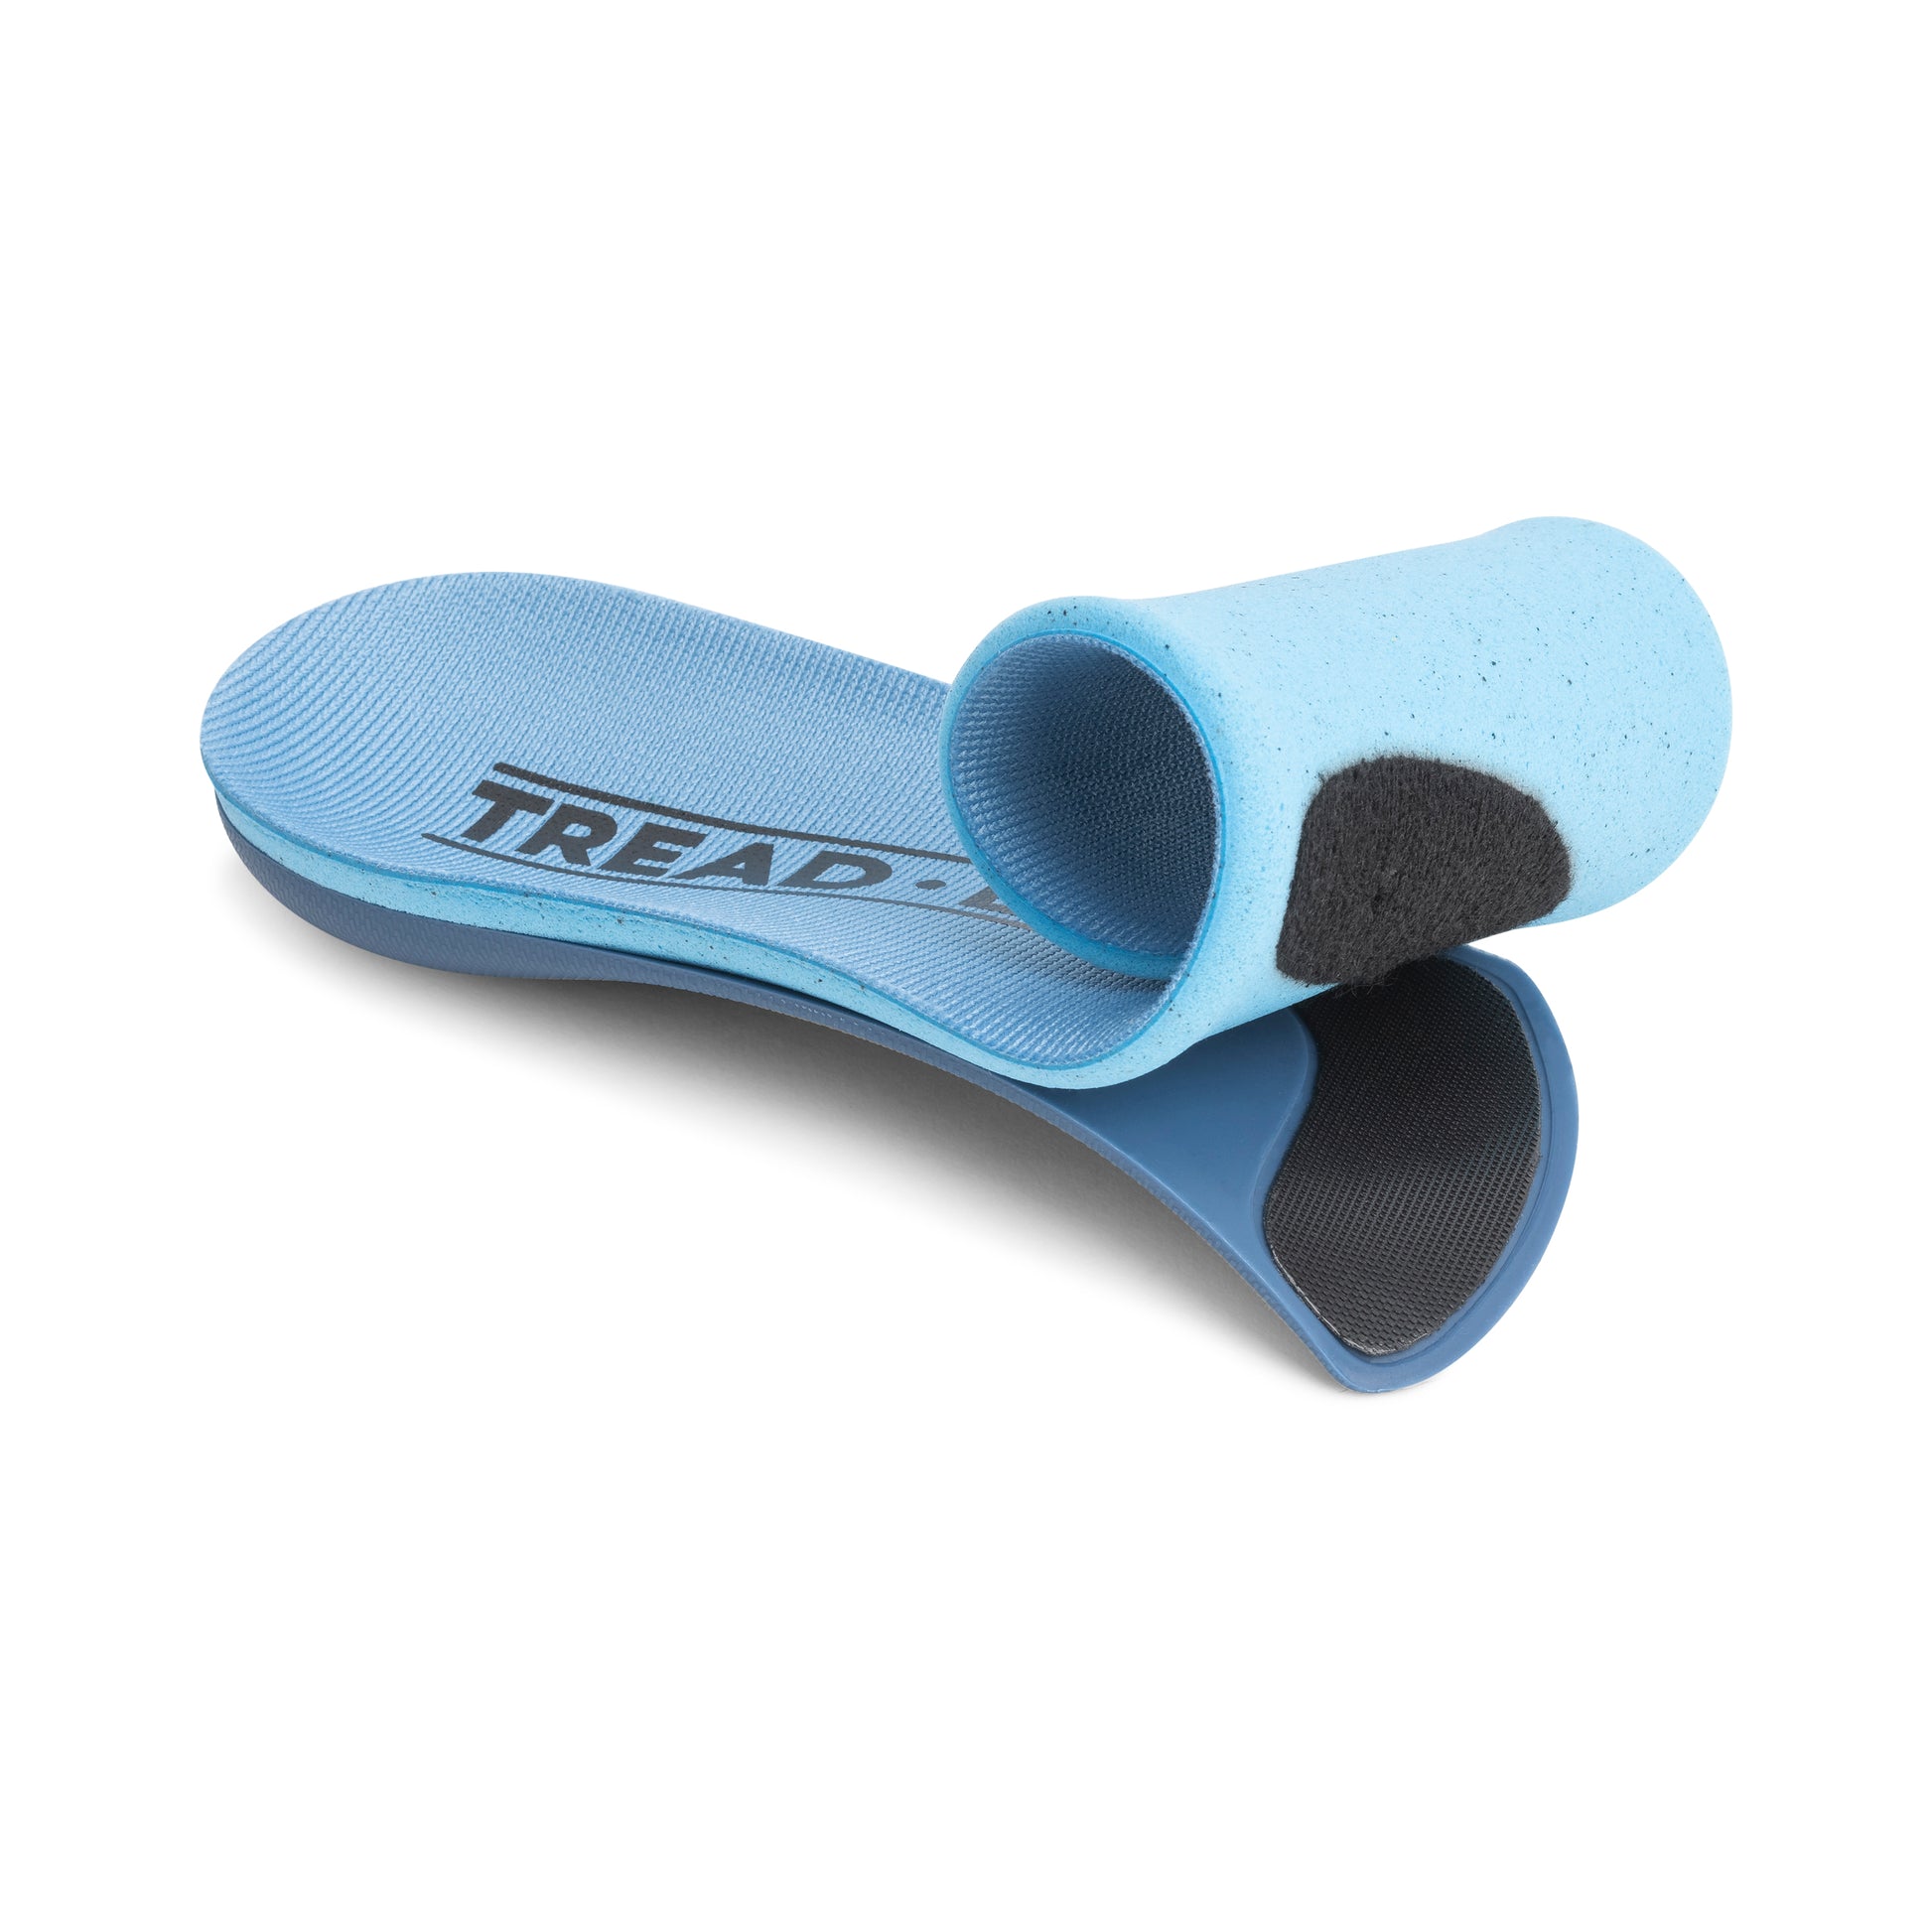 Pace orthotic shoe insoles with replacement top covers